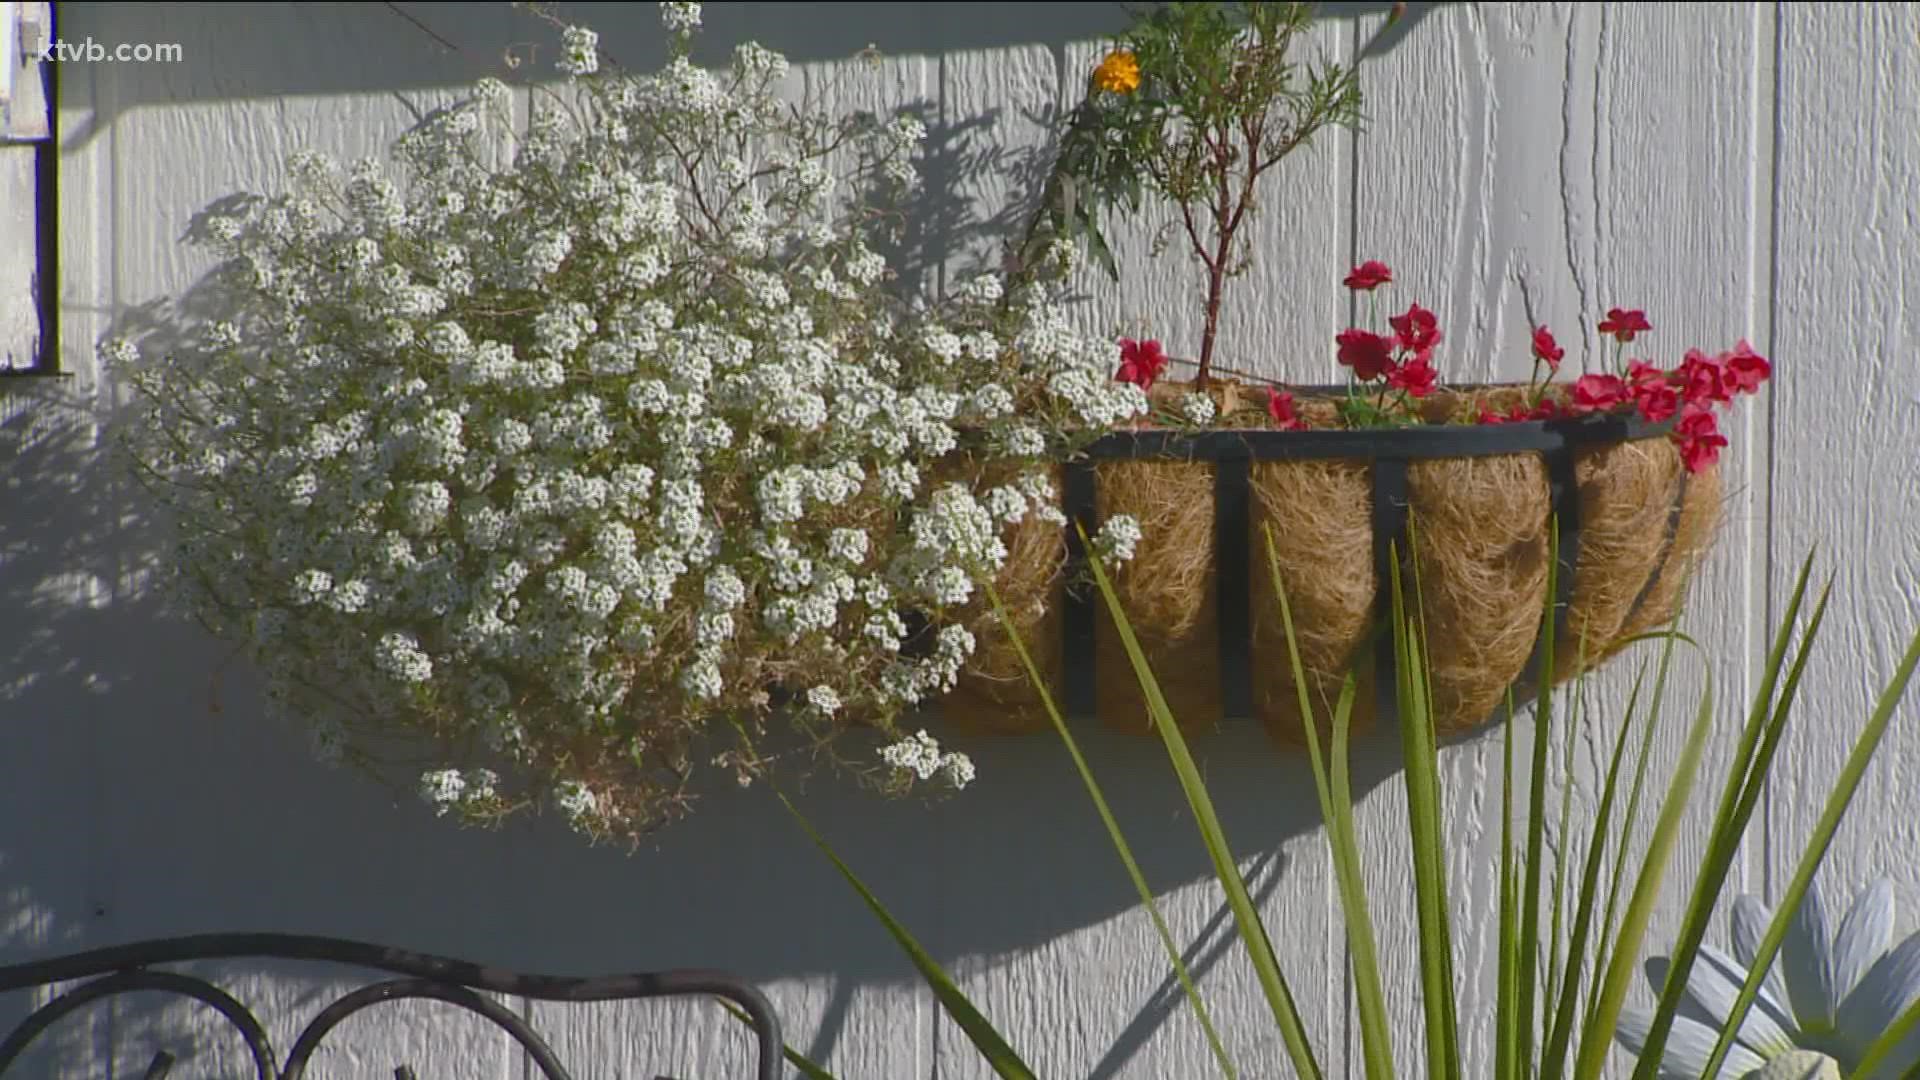 Garden master Jim Duthie takes us to an RV park where people have learned to grow in small spaces.